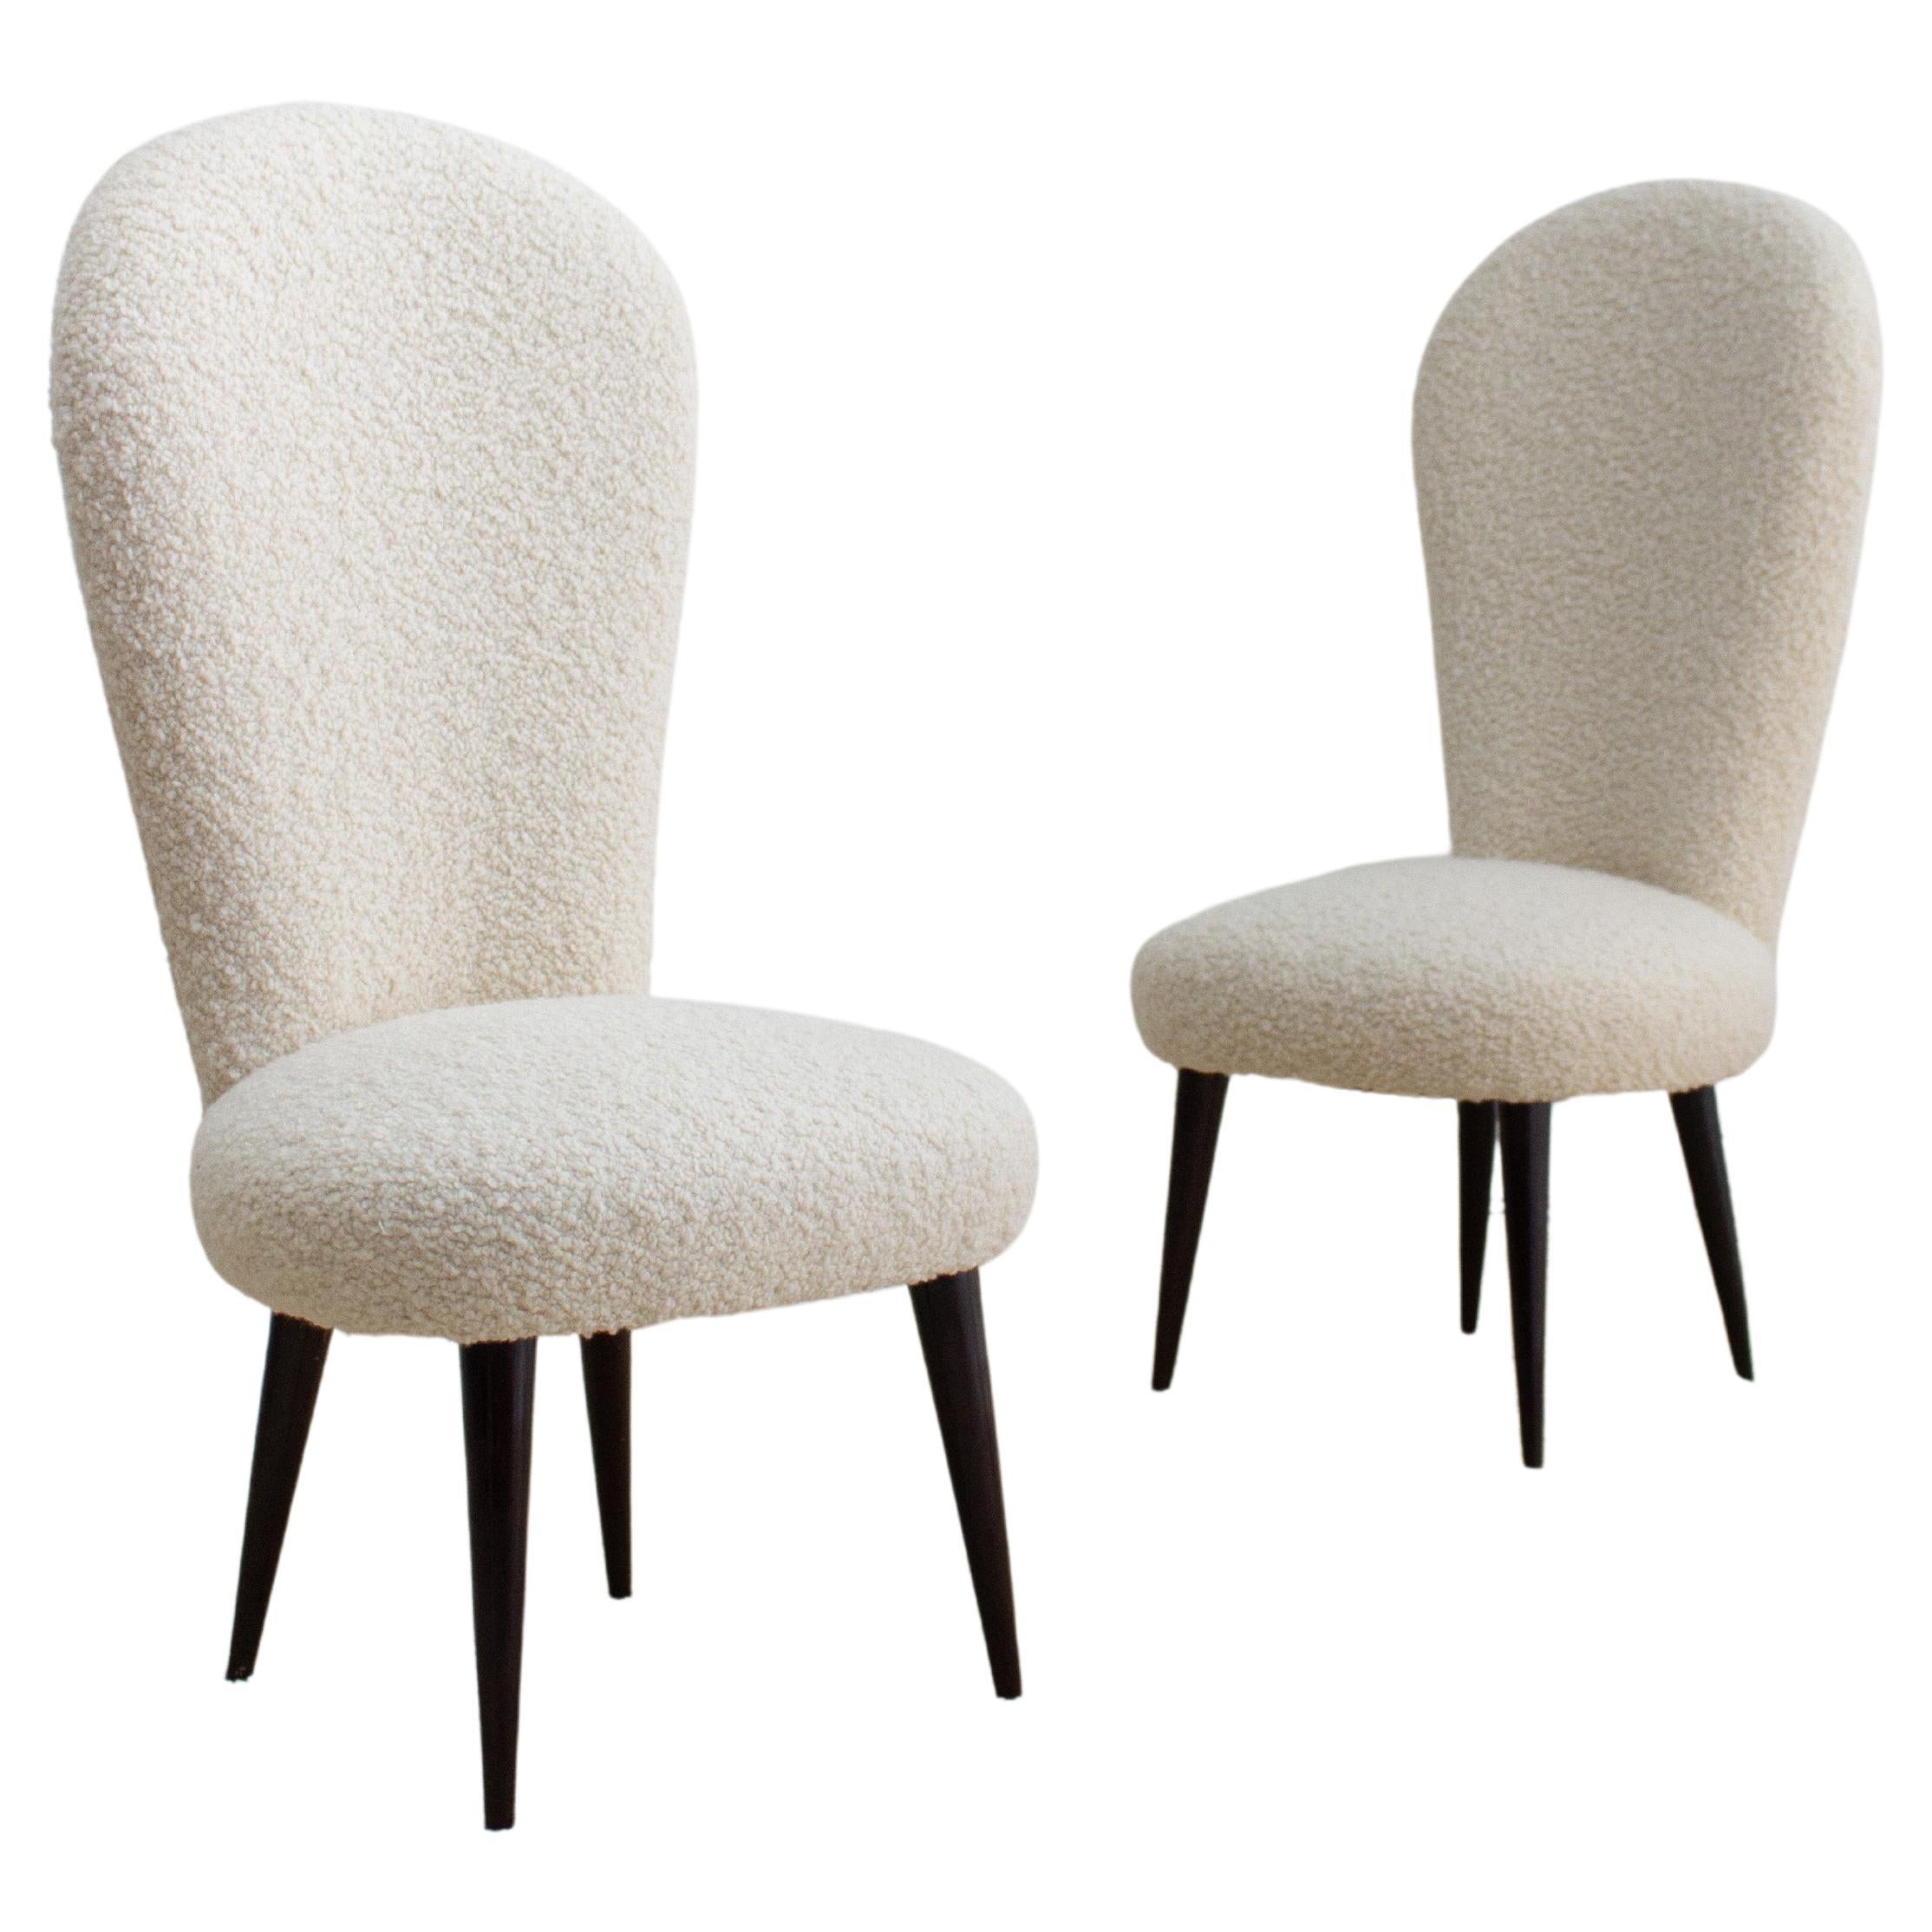 High Back Italian Chairs in Cream Bouclé - a Pair For Sale